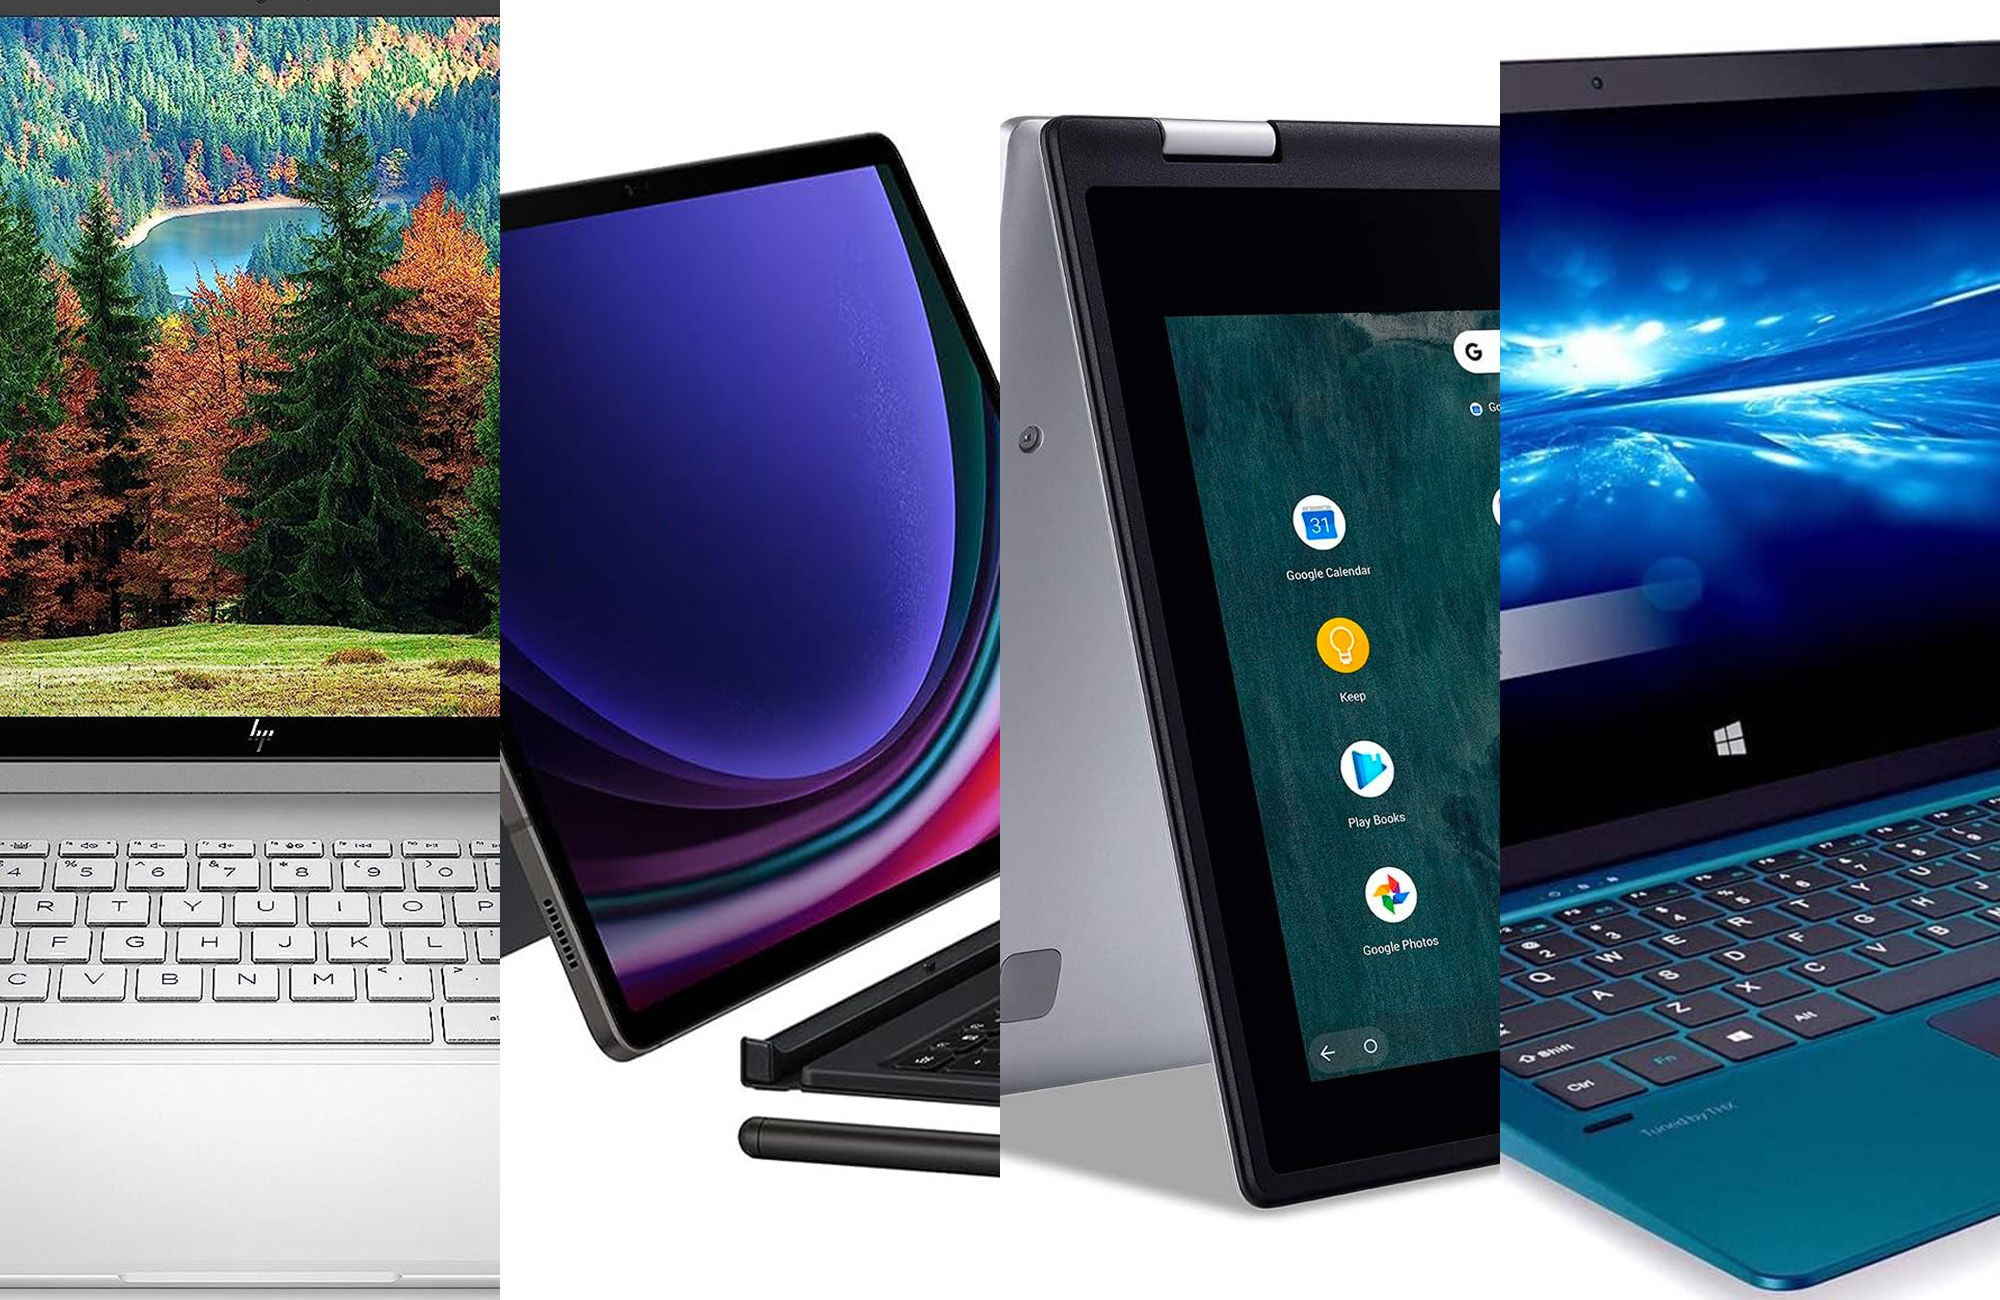  Laptops - Computers & Tablets: Electronics: Traditional Laptops,  2 in 1 Laptops & More